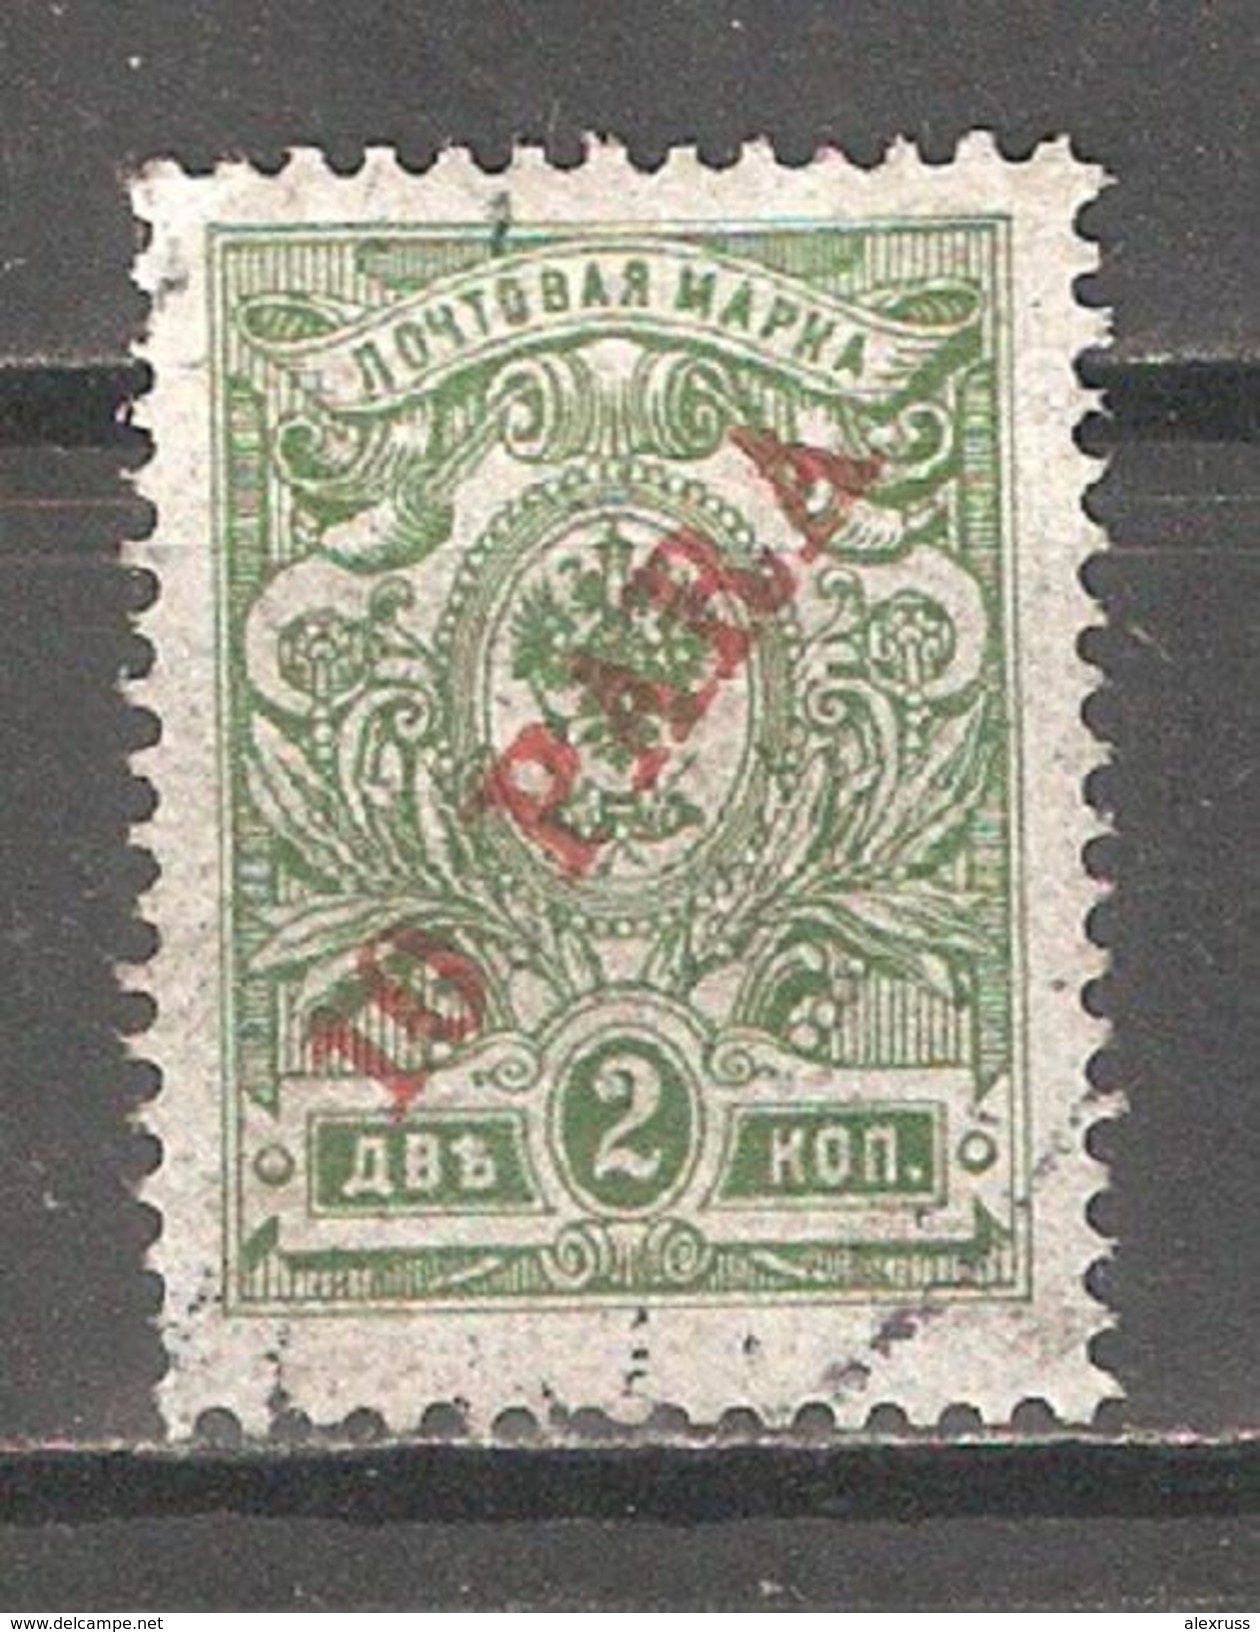 Russia 1910 Offices In Turkey, 10p On 2k, Scott # 202, VF USED - Turkish Empire